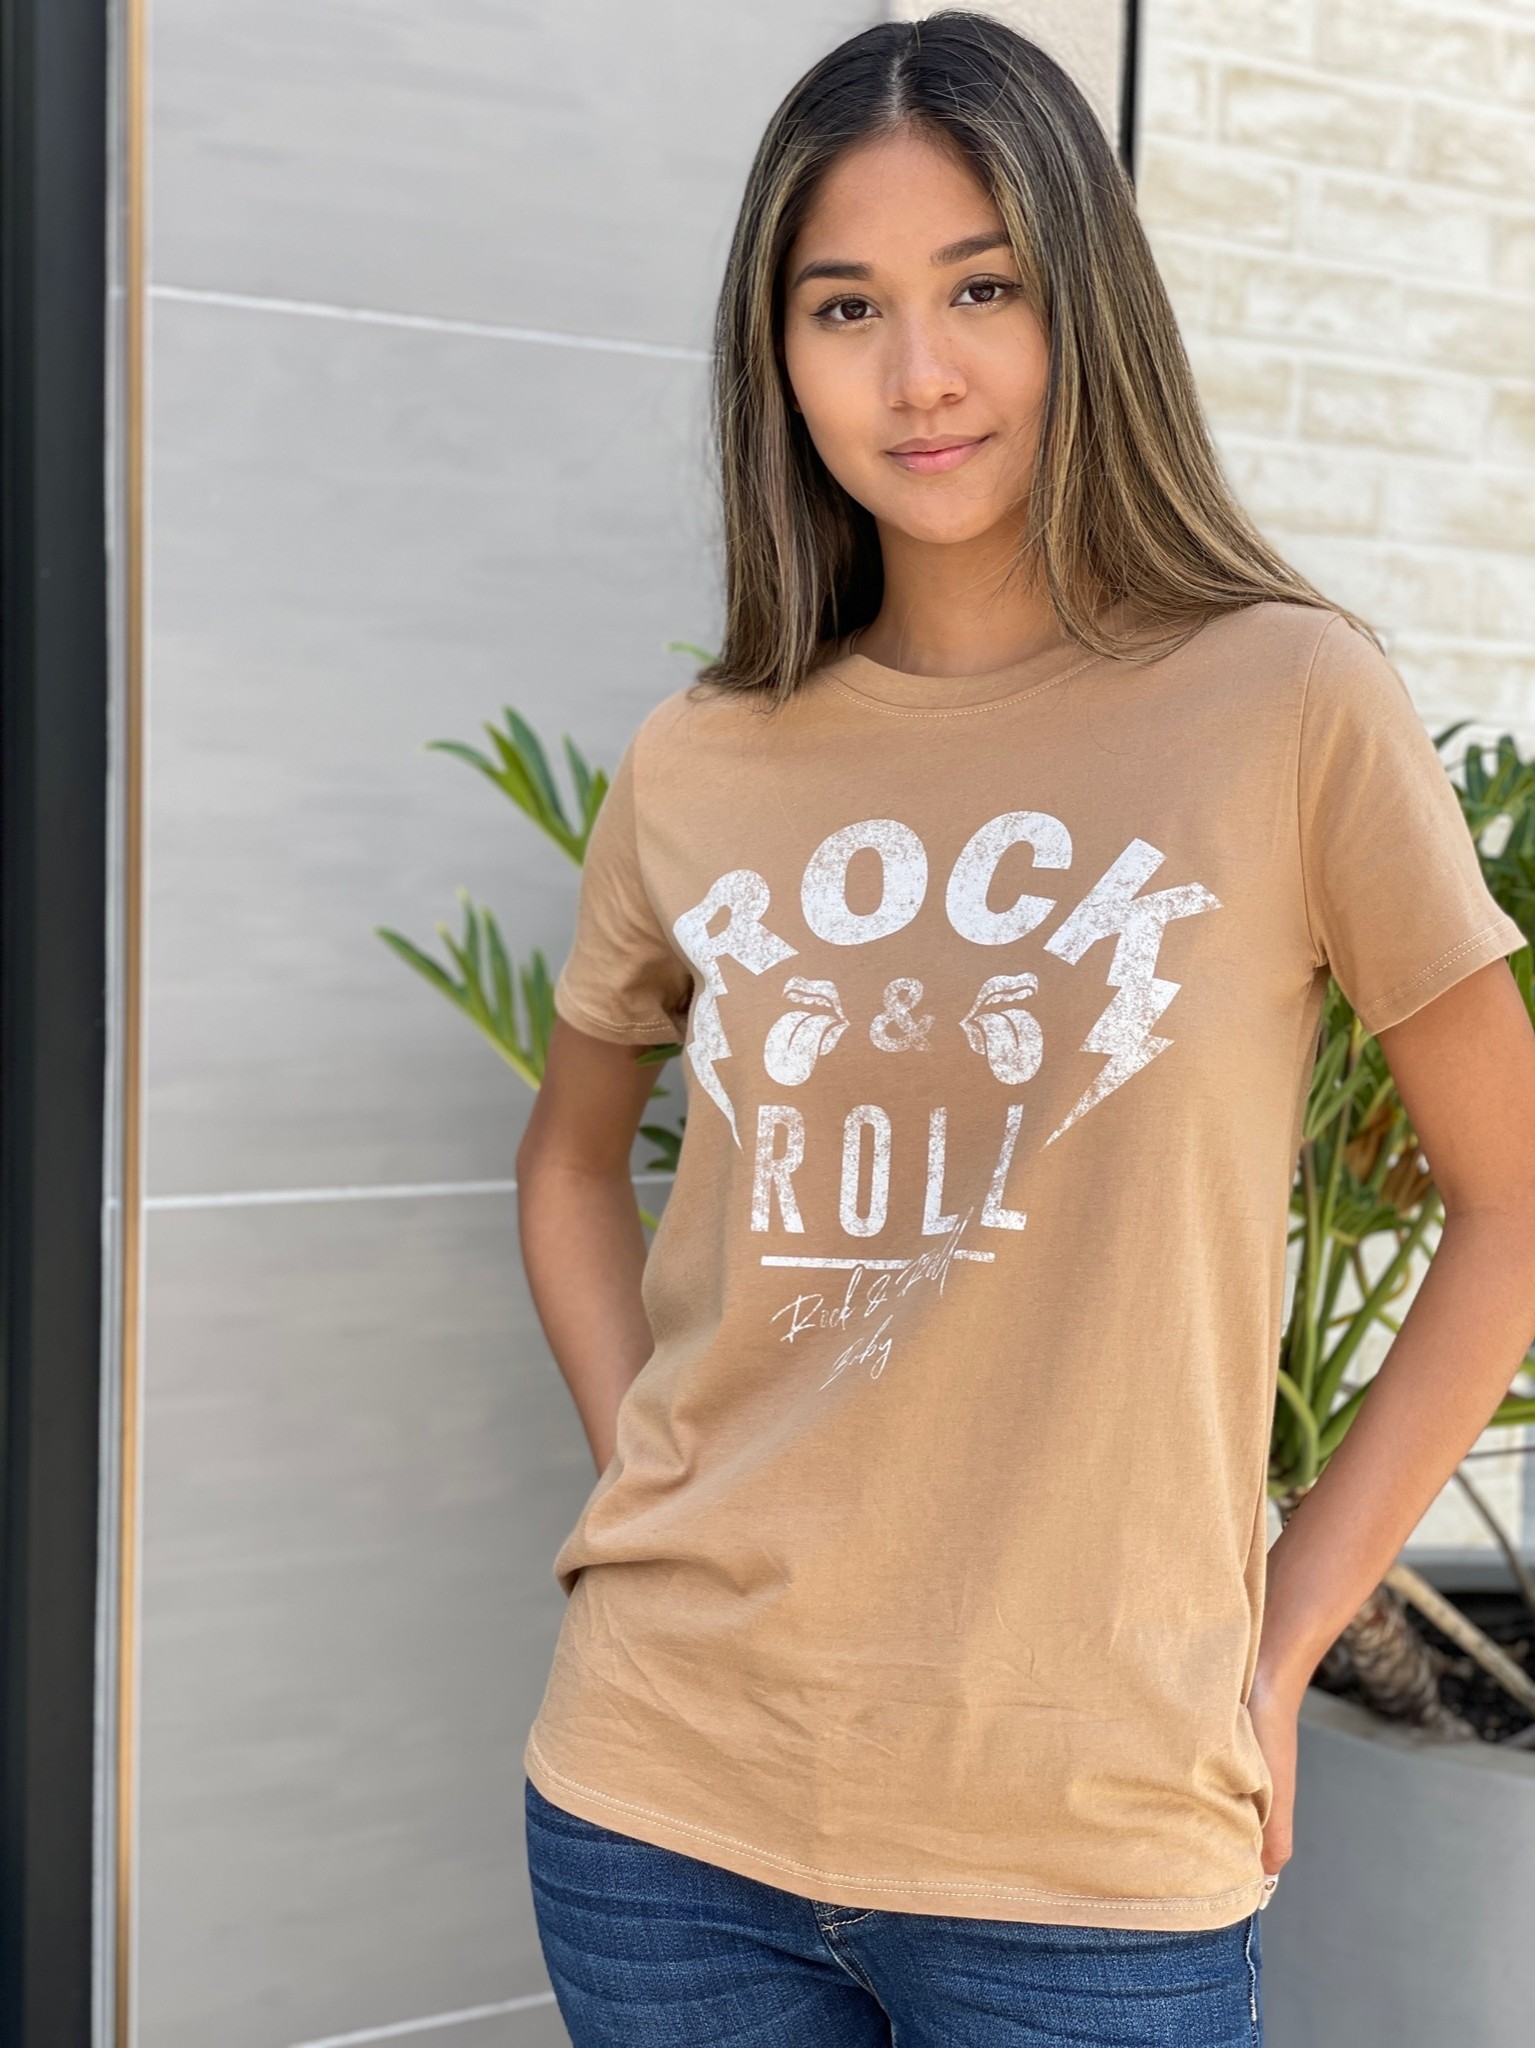 T-37760 "ROCK AND ROLL" GRAPHIC TEE